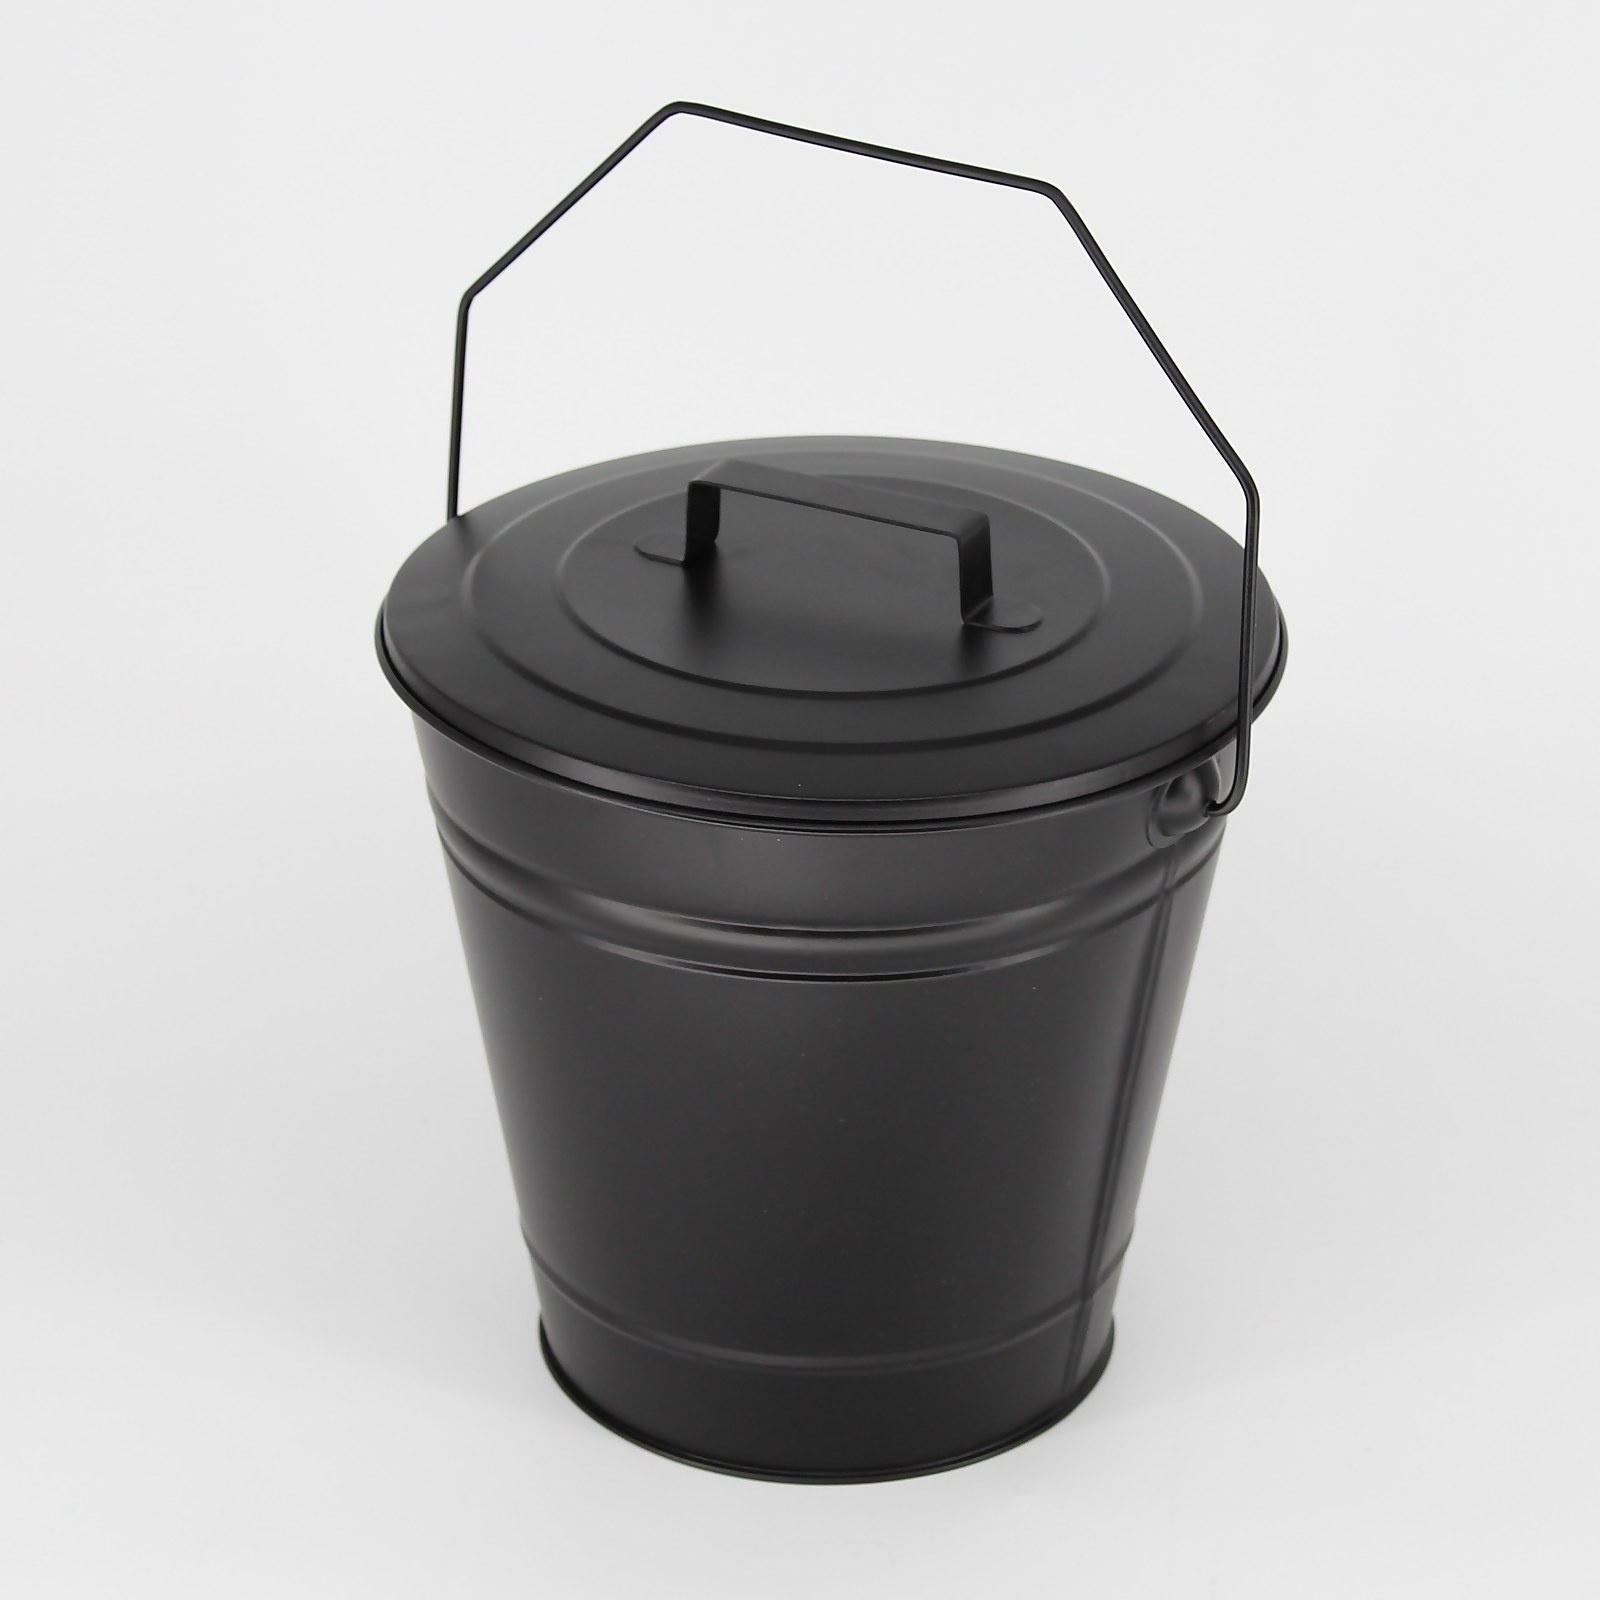 Photo of Fireplace Ash Bucket With Lid - Black